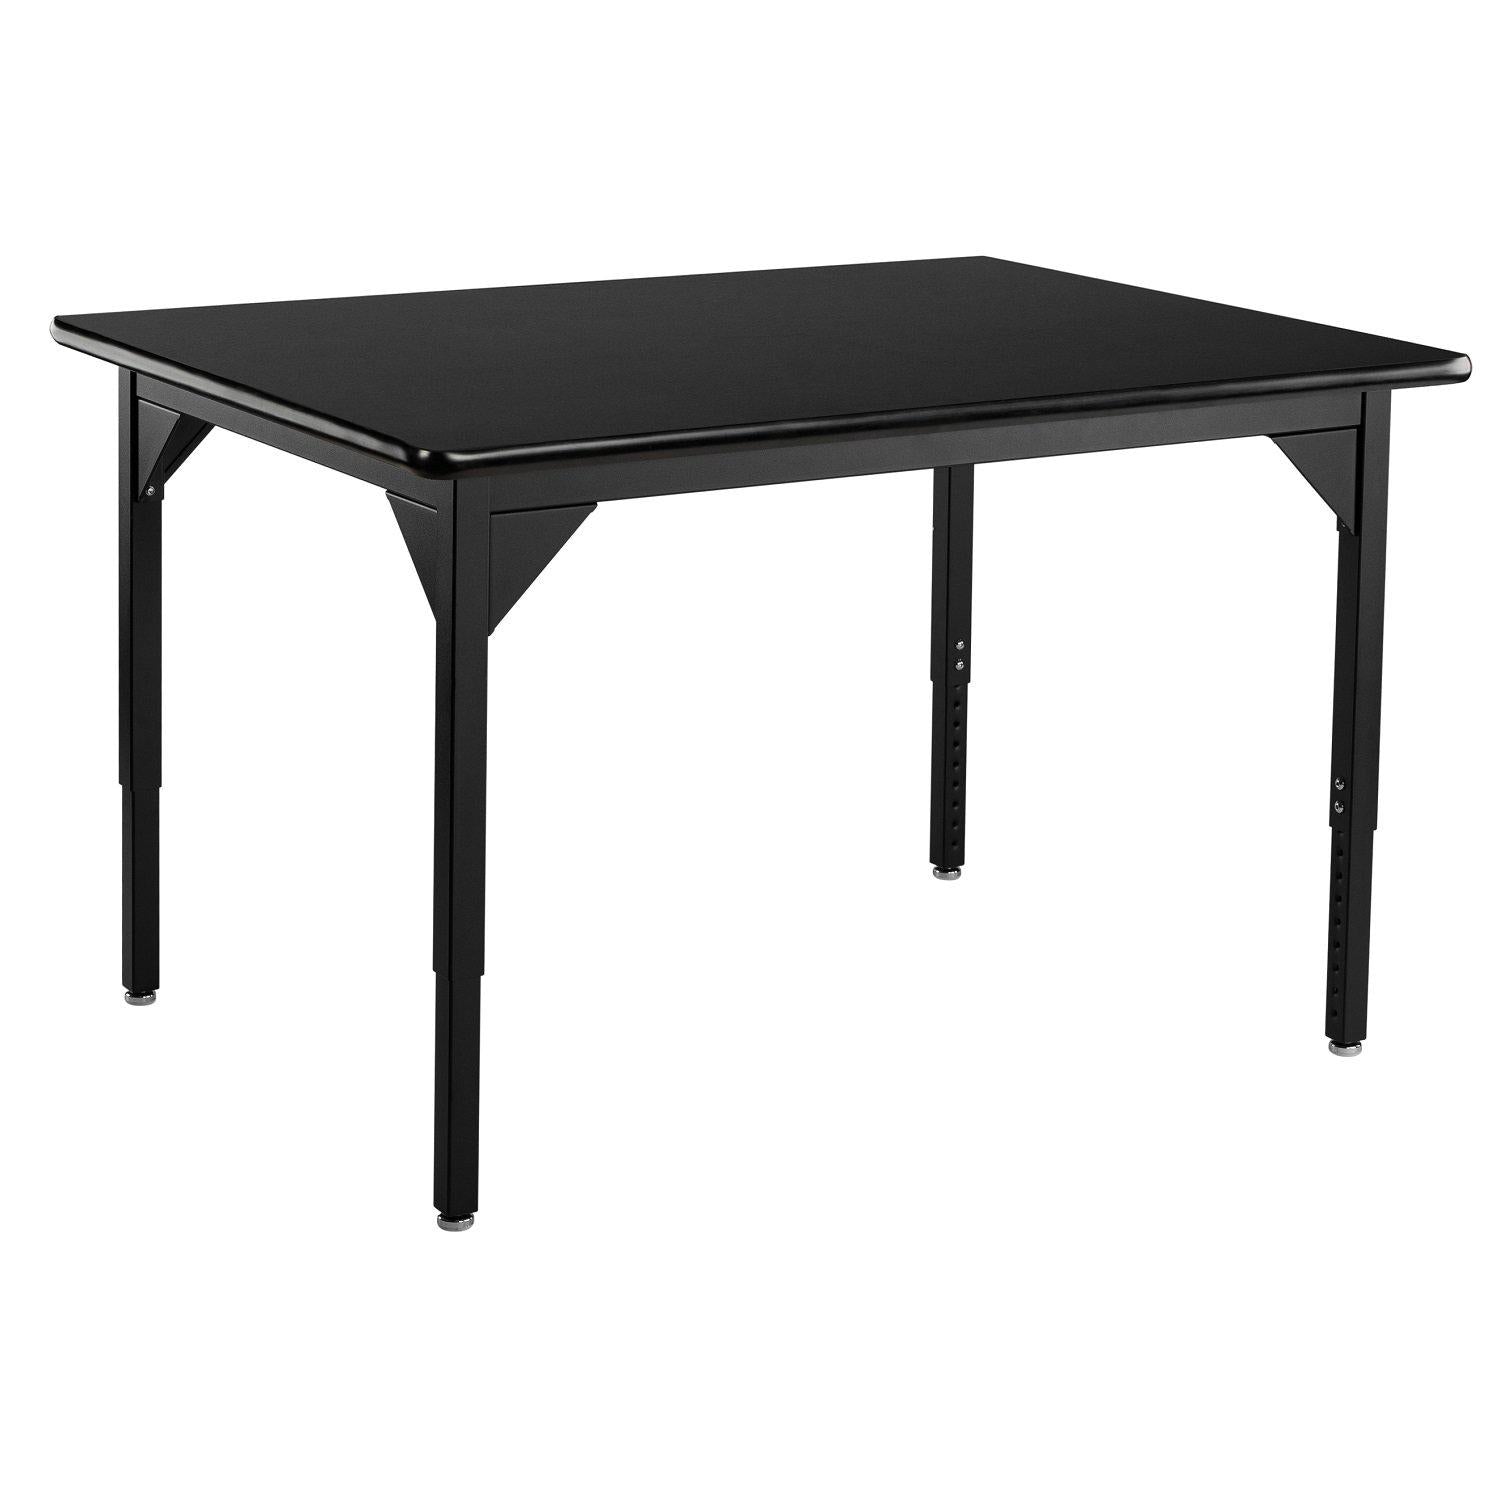 Heavy-Duty Height-Adjustable Utility Table, Black Frame, 36" x 60", High-Pressure Laminate Top with T-Mold Edge